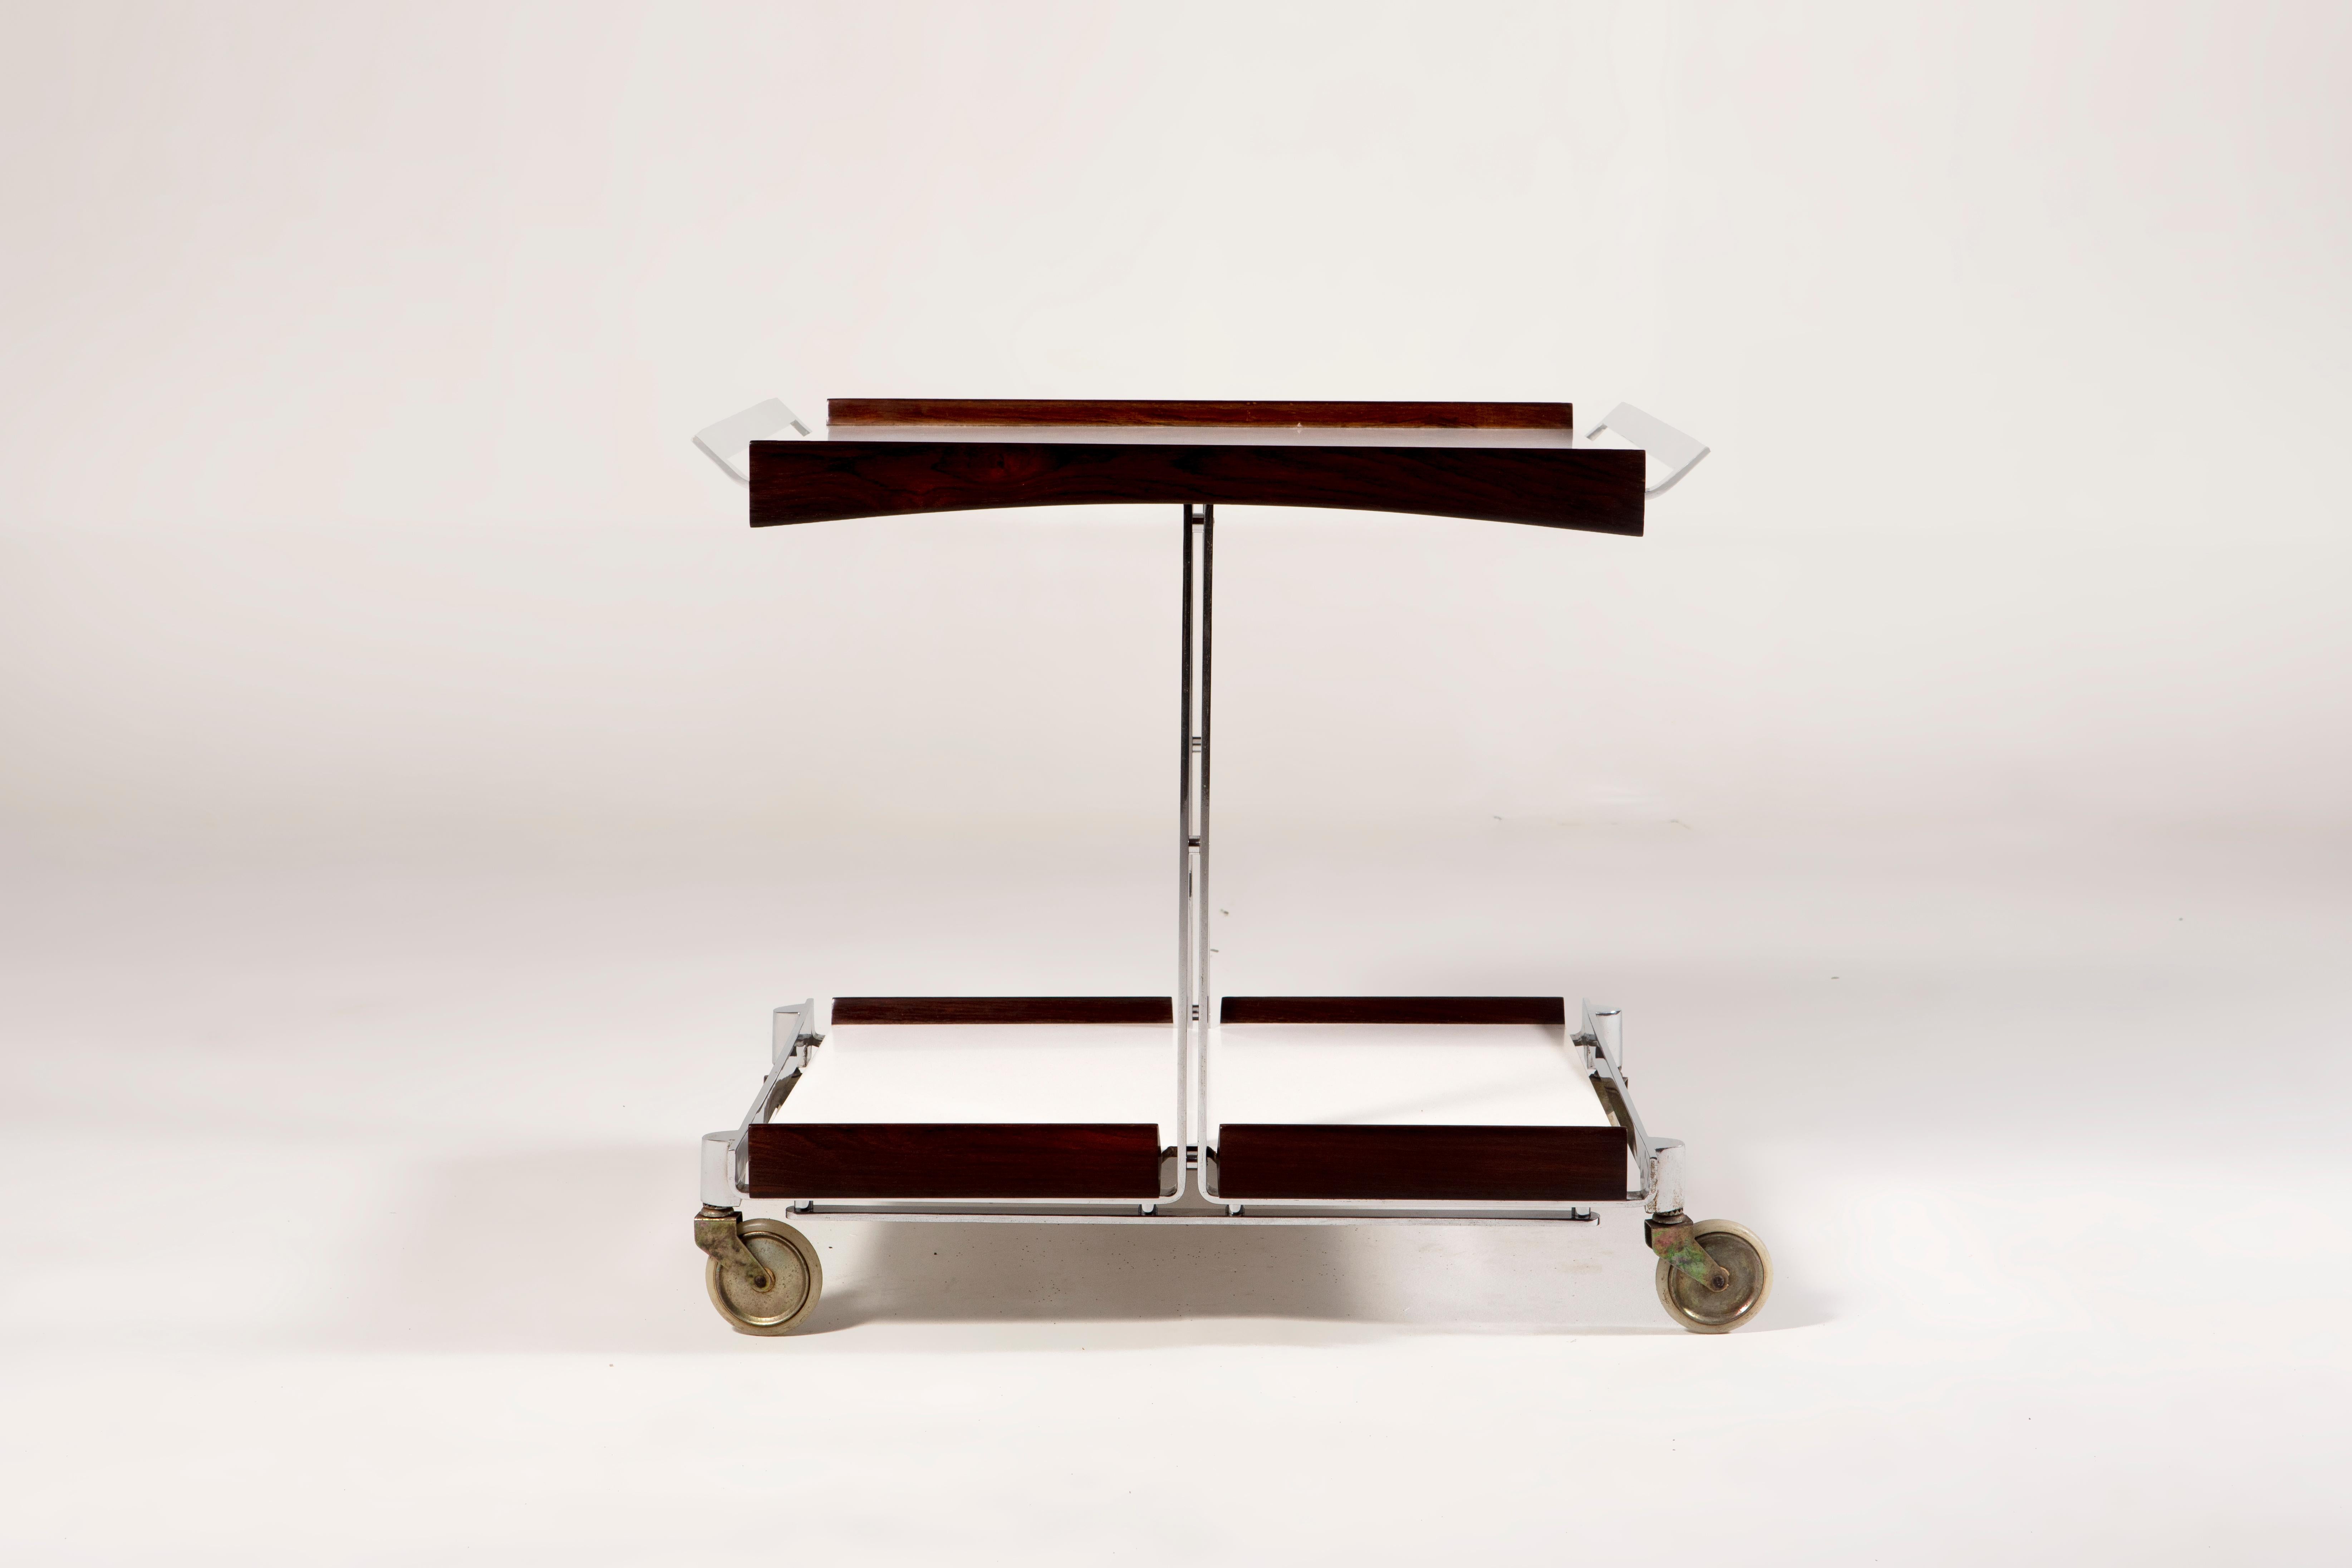 Mid-Century Modern Tea Cart by Forma, 1960s

Mid-Century Modern Tea Cart manufactured by Forma Manufatura circa 1950 and designed by Carlo Hauner and Martin Eisler.
It has square Formica tops and wooden sides, with chromed metal handles and has